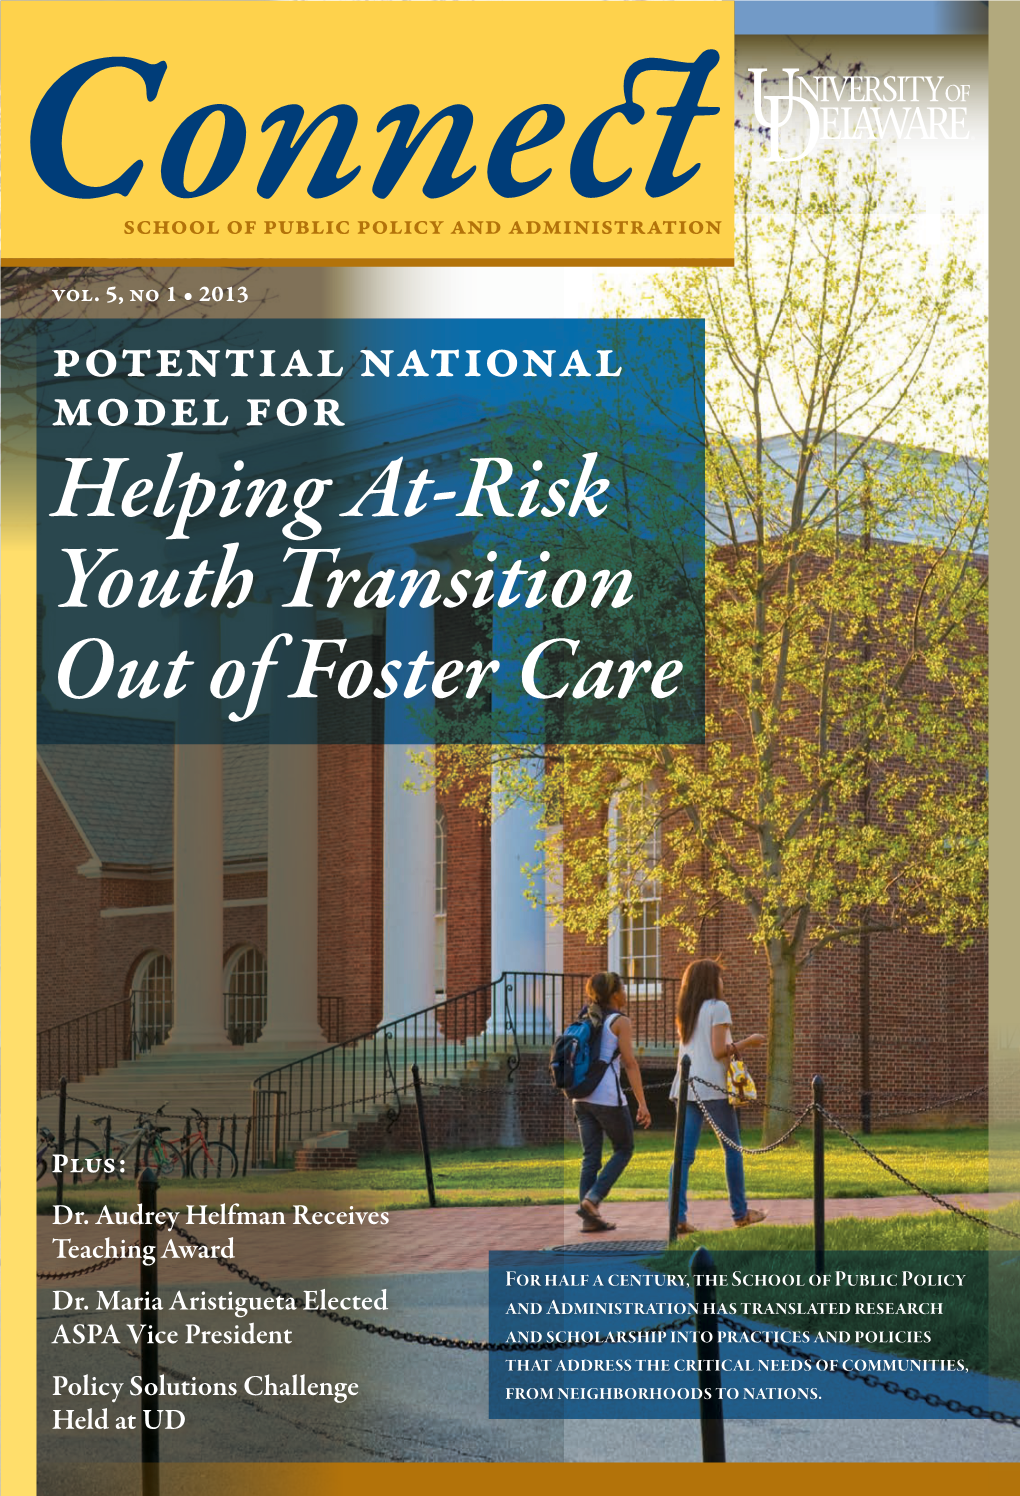 Helping At-Risk Youth Transition out of Foster Care